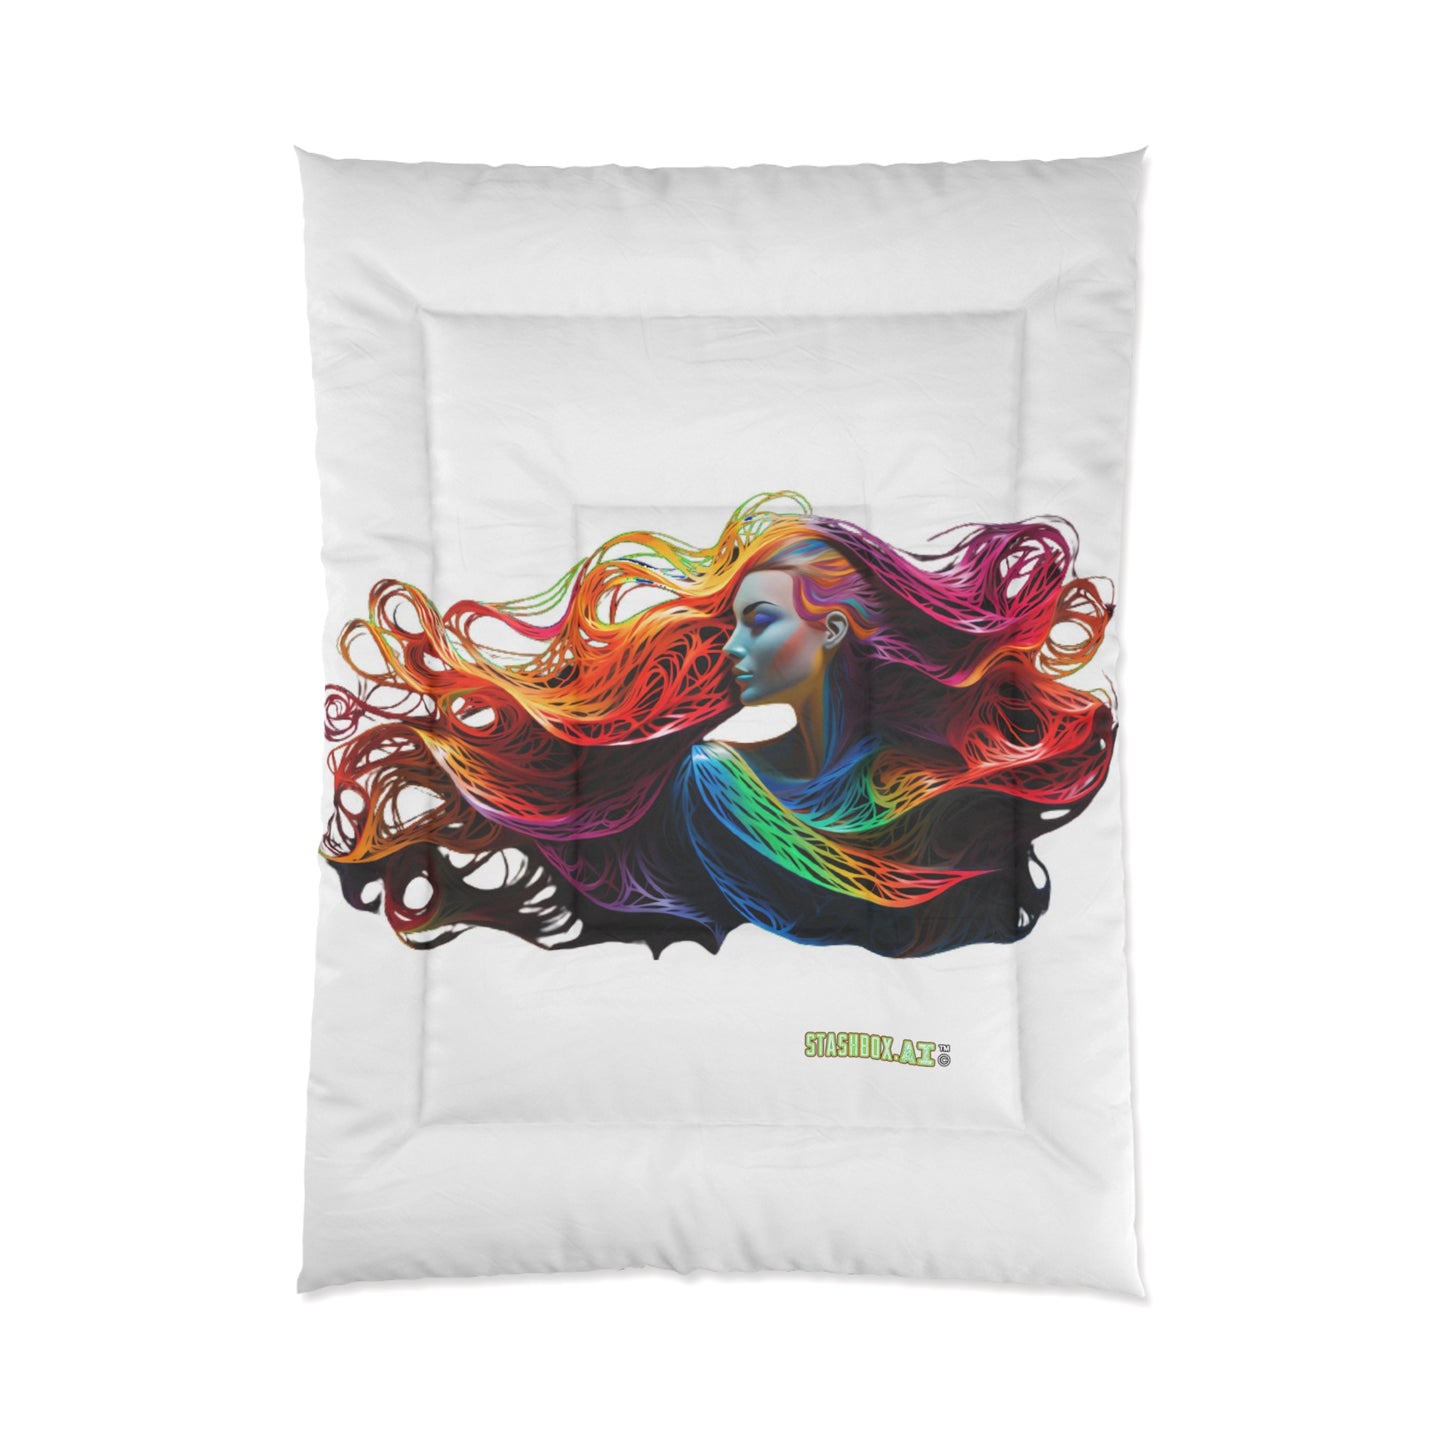 Bedding Comforter Beautiful Models Drawn with Rainbow Ink #015